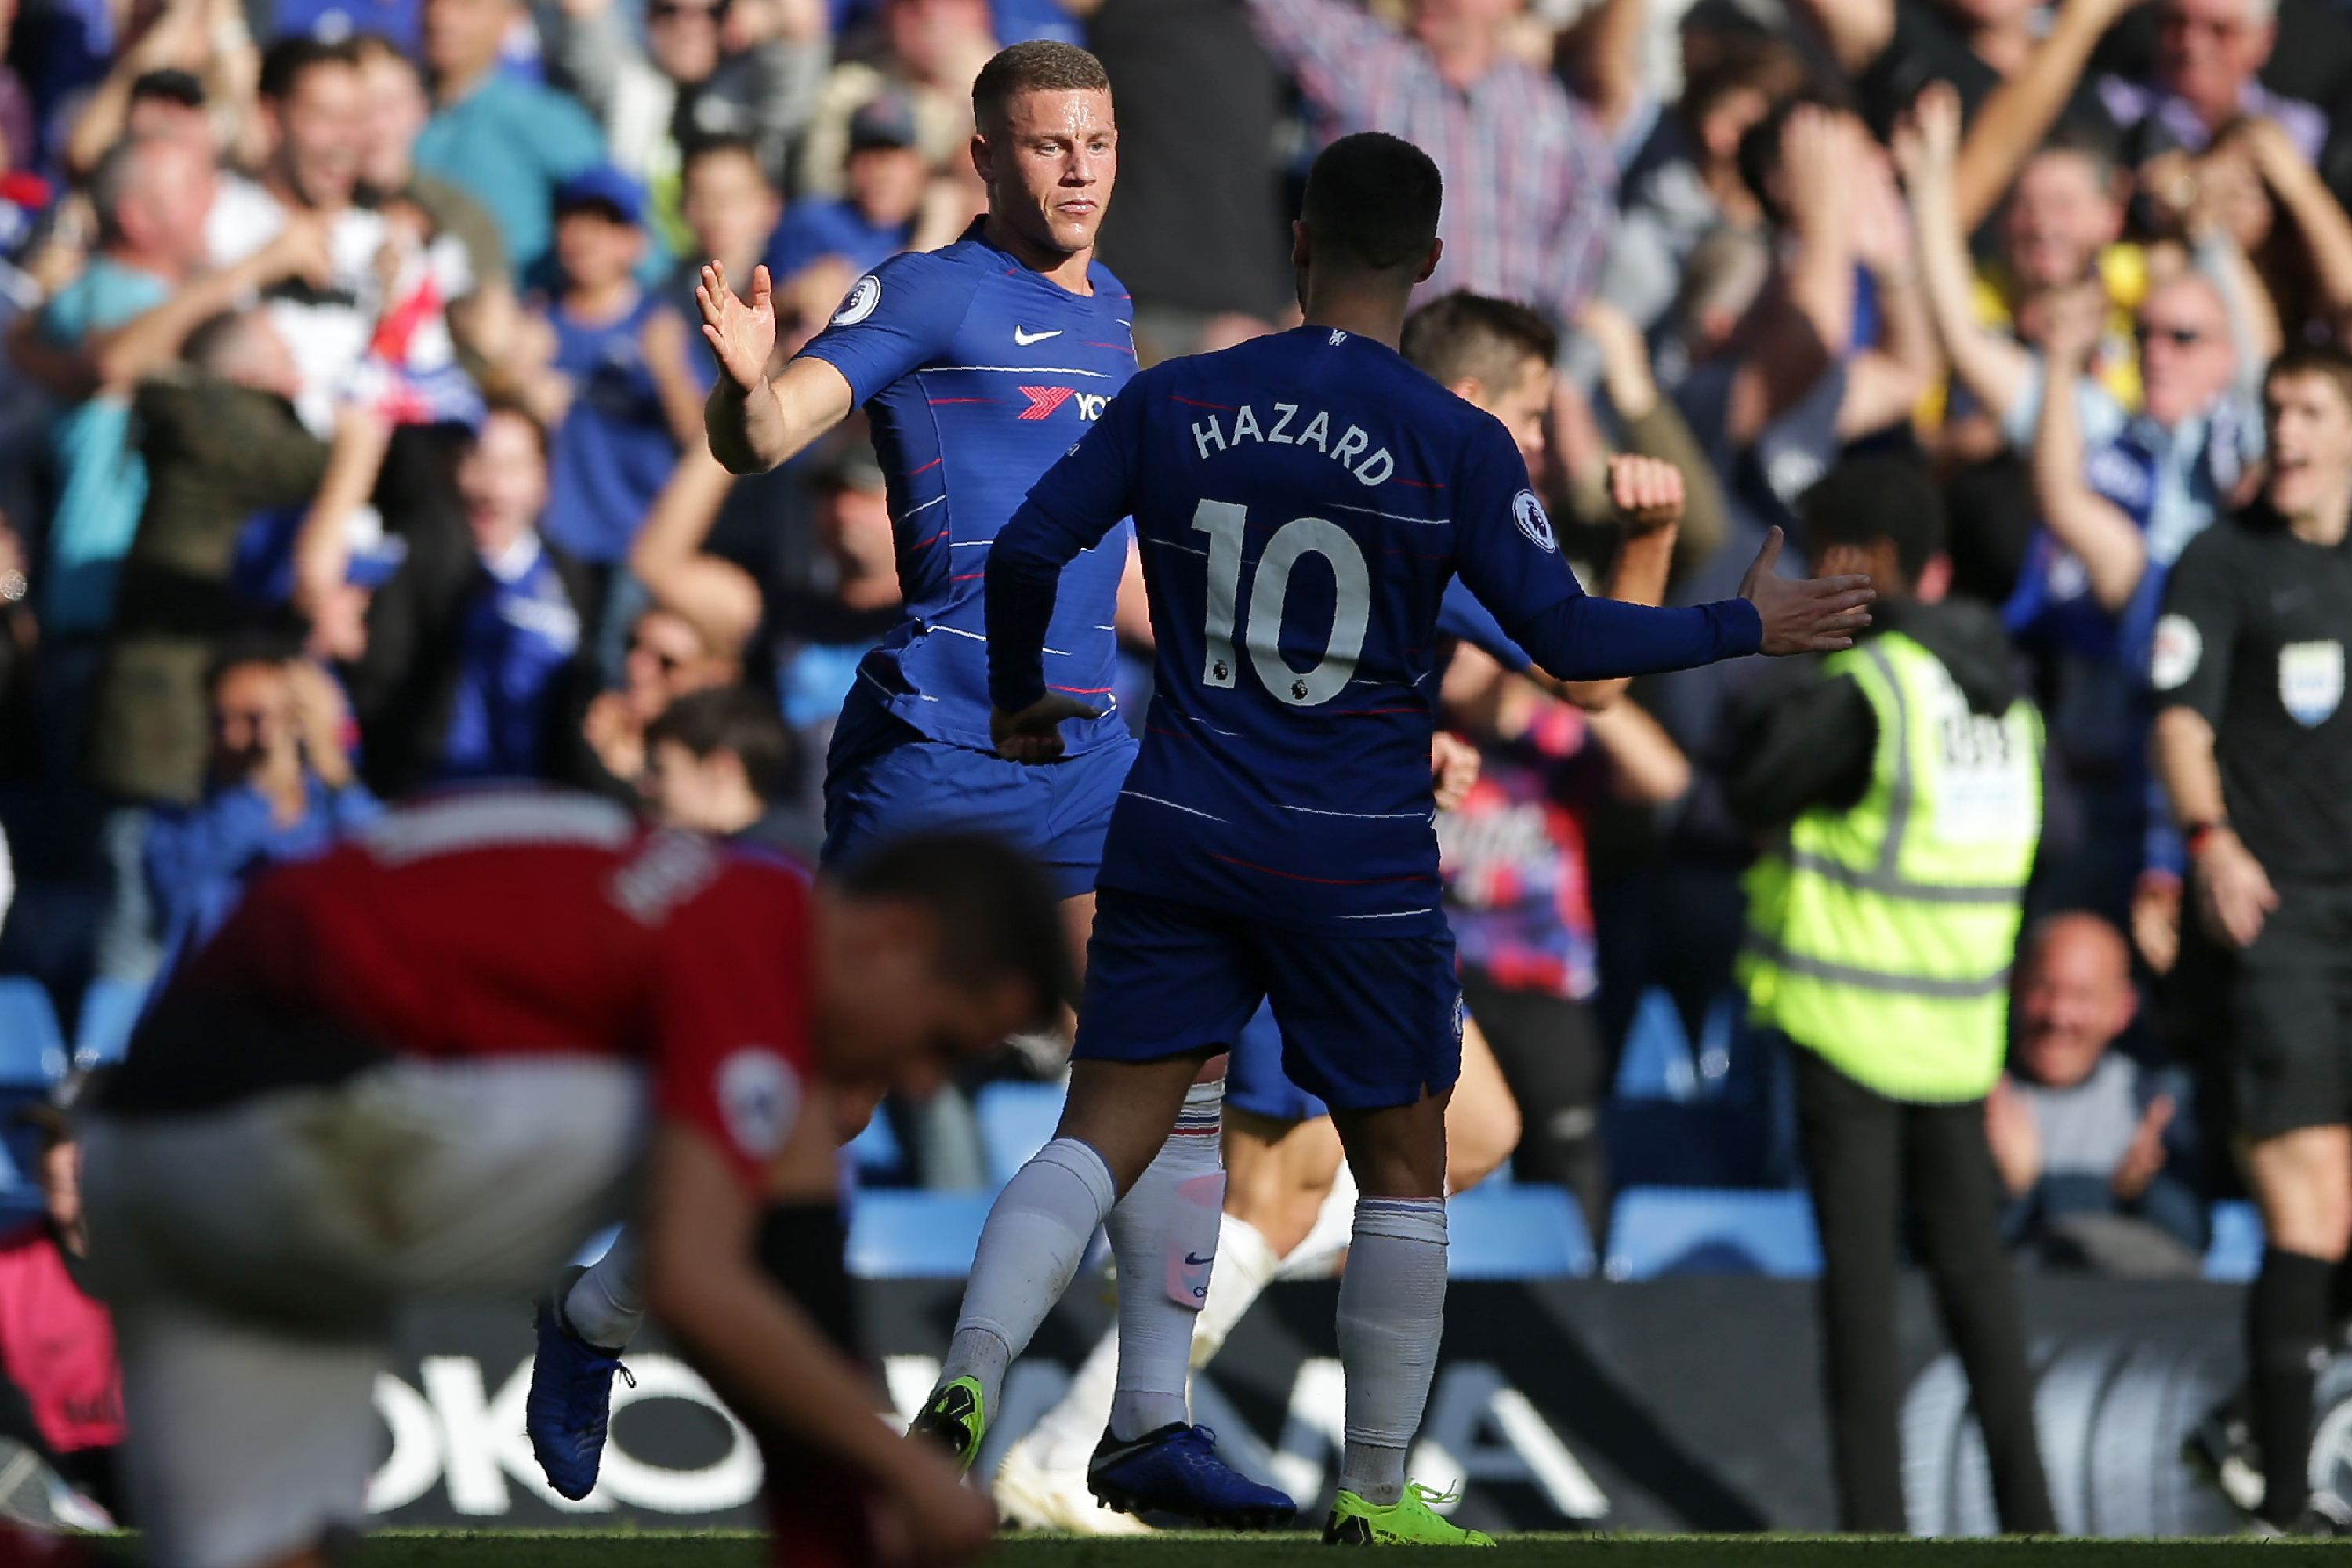 Chelsea's English midfielder Ross Barkley (C) celebrates with Chelsea's Belgian midfielder Eden Hazard after scoring their second goal during the English Premier League football match between Chelsea and Manchester United at Stamford Bridge in London on October 20, 2018. - The game finished 2-2. (Photo by Daniel LEAL-OLIVAS / AFP) / RESTRICTED TO EDITORIAL USE. No use with unauthorized audio, video, data, fixture lists, club/league logos or 'live' services. Online in-match use limited to 120 images. An additional 40 images may be used in extra time. No video emulation. Social media in-match use limited to 120 images. An additional 40 images may be used in extra time. No use in betting publications, games or single club/league/player publications. /         (Photo credit should read DANIEL LEAL-OLIVAS/AFP/Getty Images)